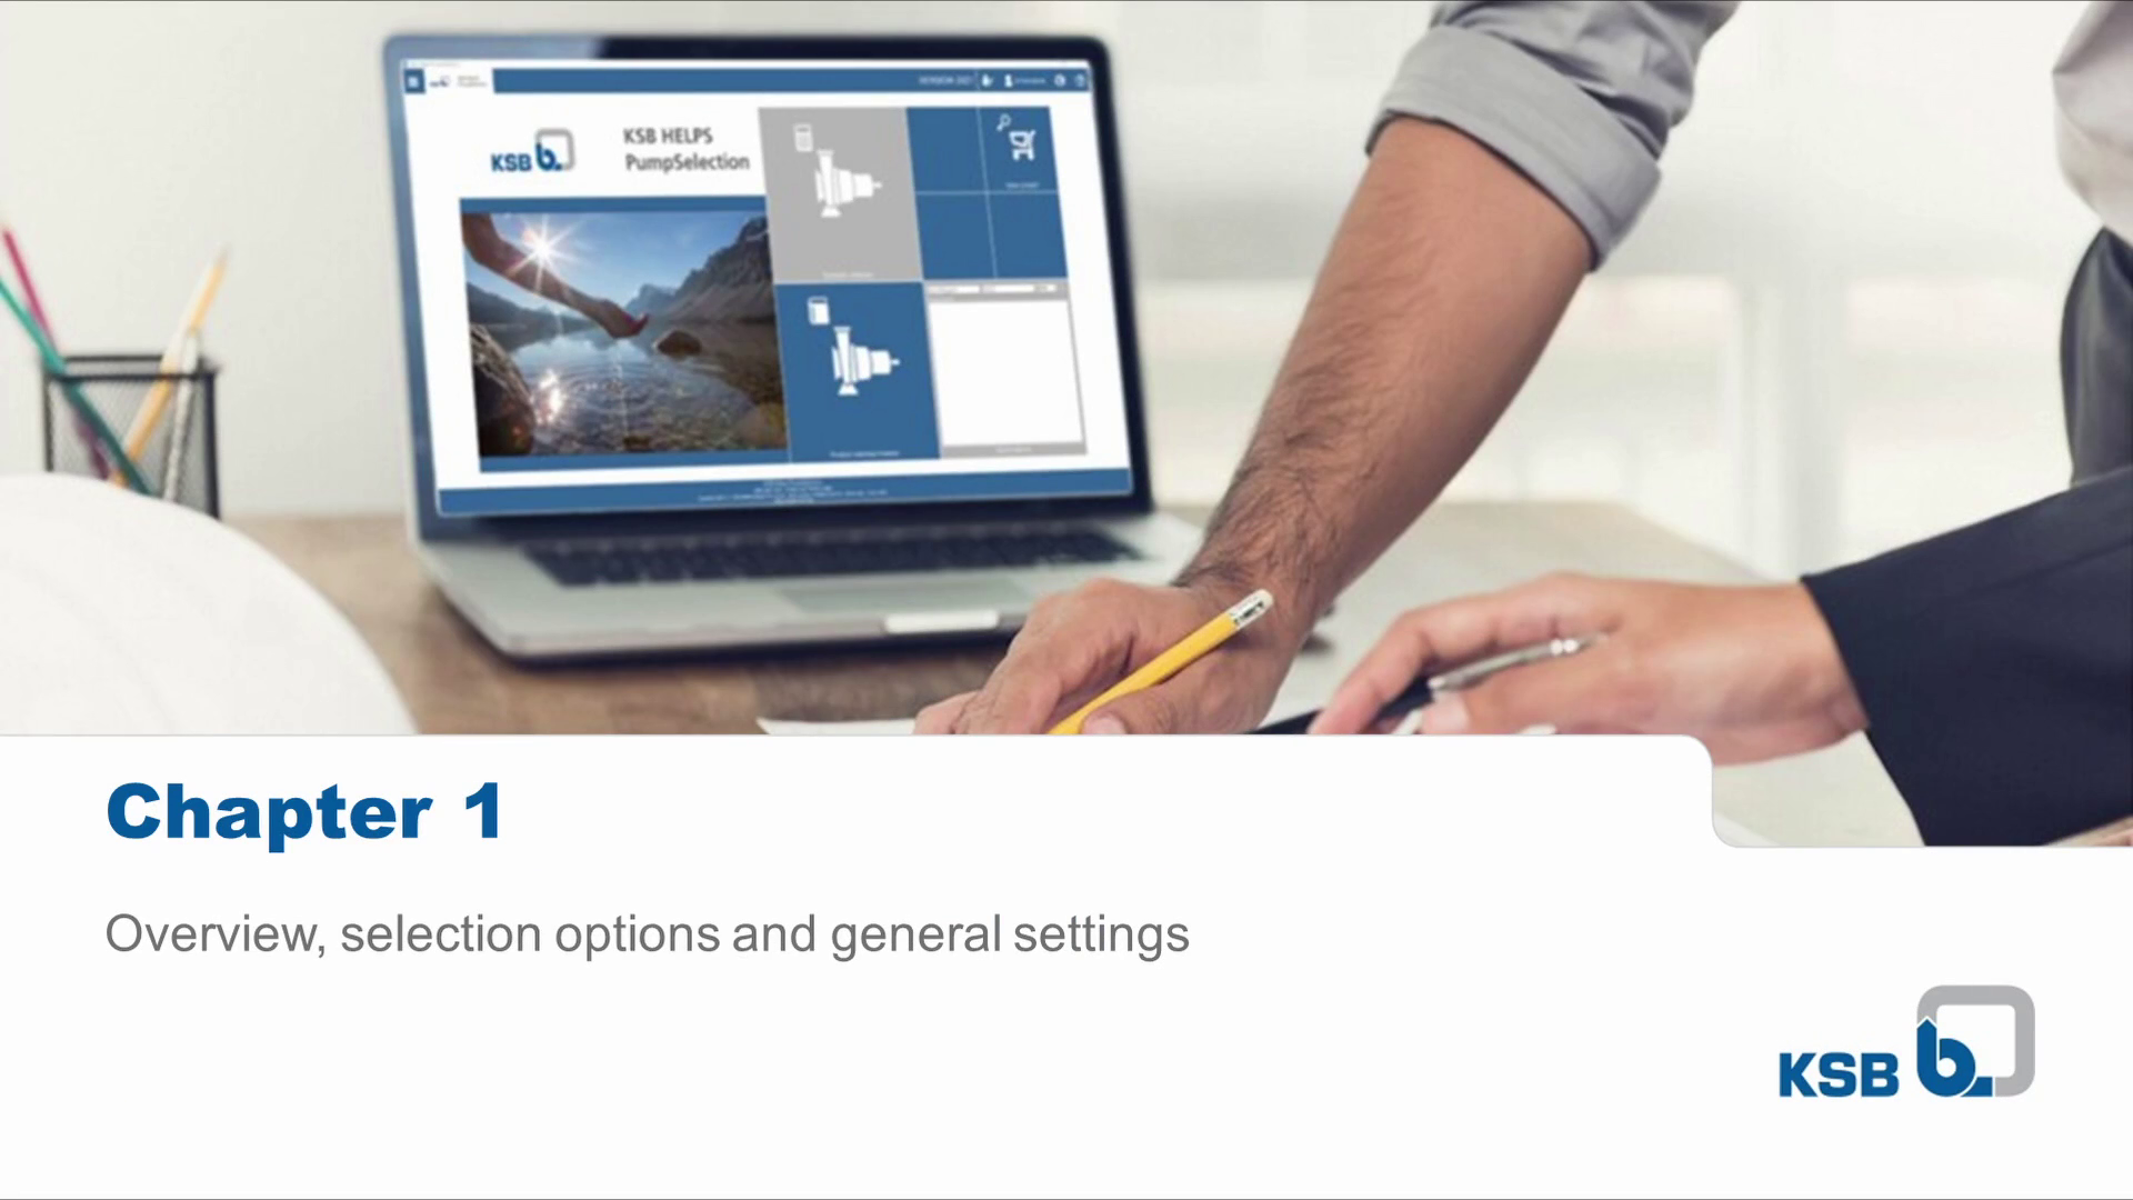 Tutorial KSB HELPS PumpSelection, Chapter 1: Overview, selection options and general settings